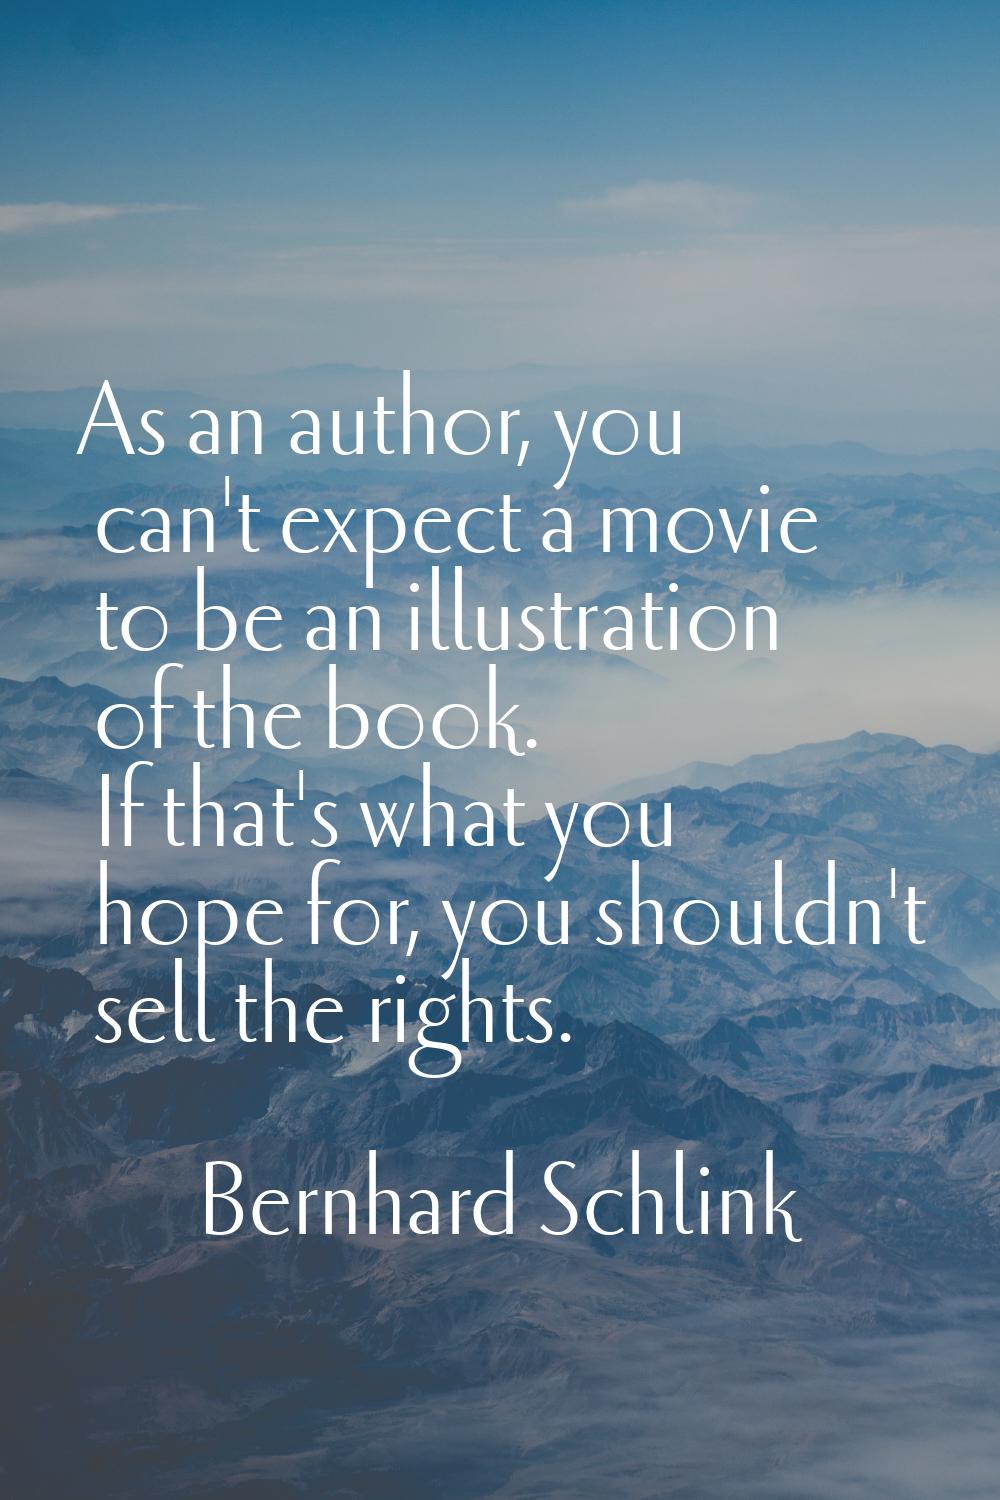 As an author, you can't expect a movie to be an illustration of the book. If that's what you hope f